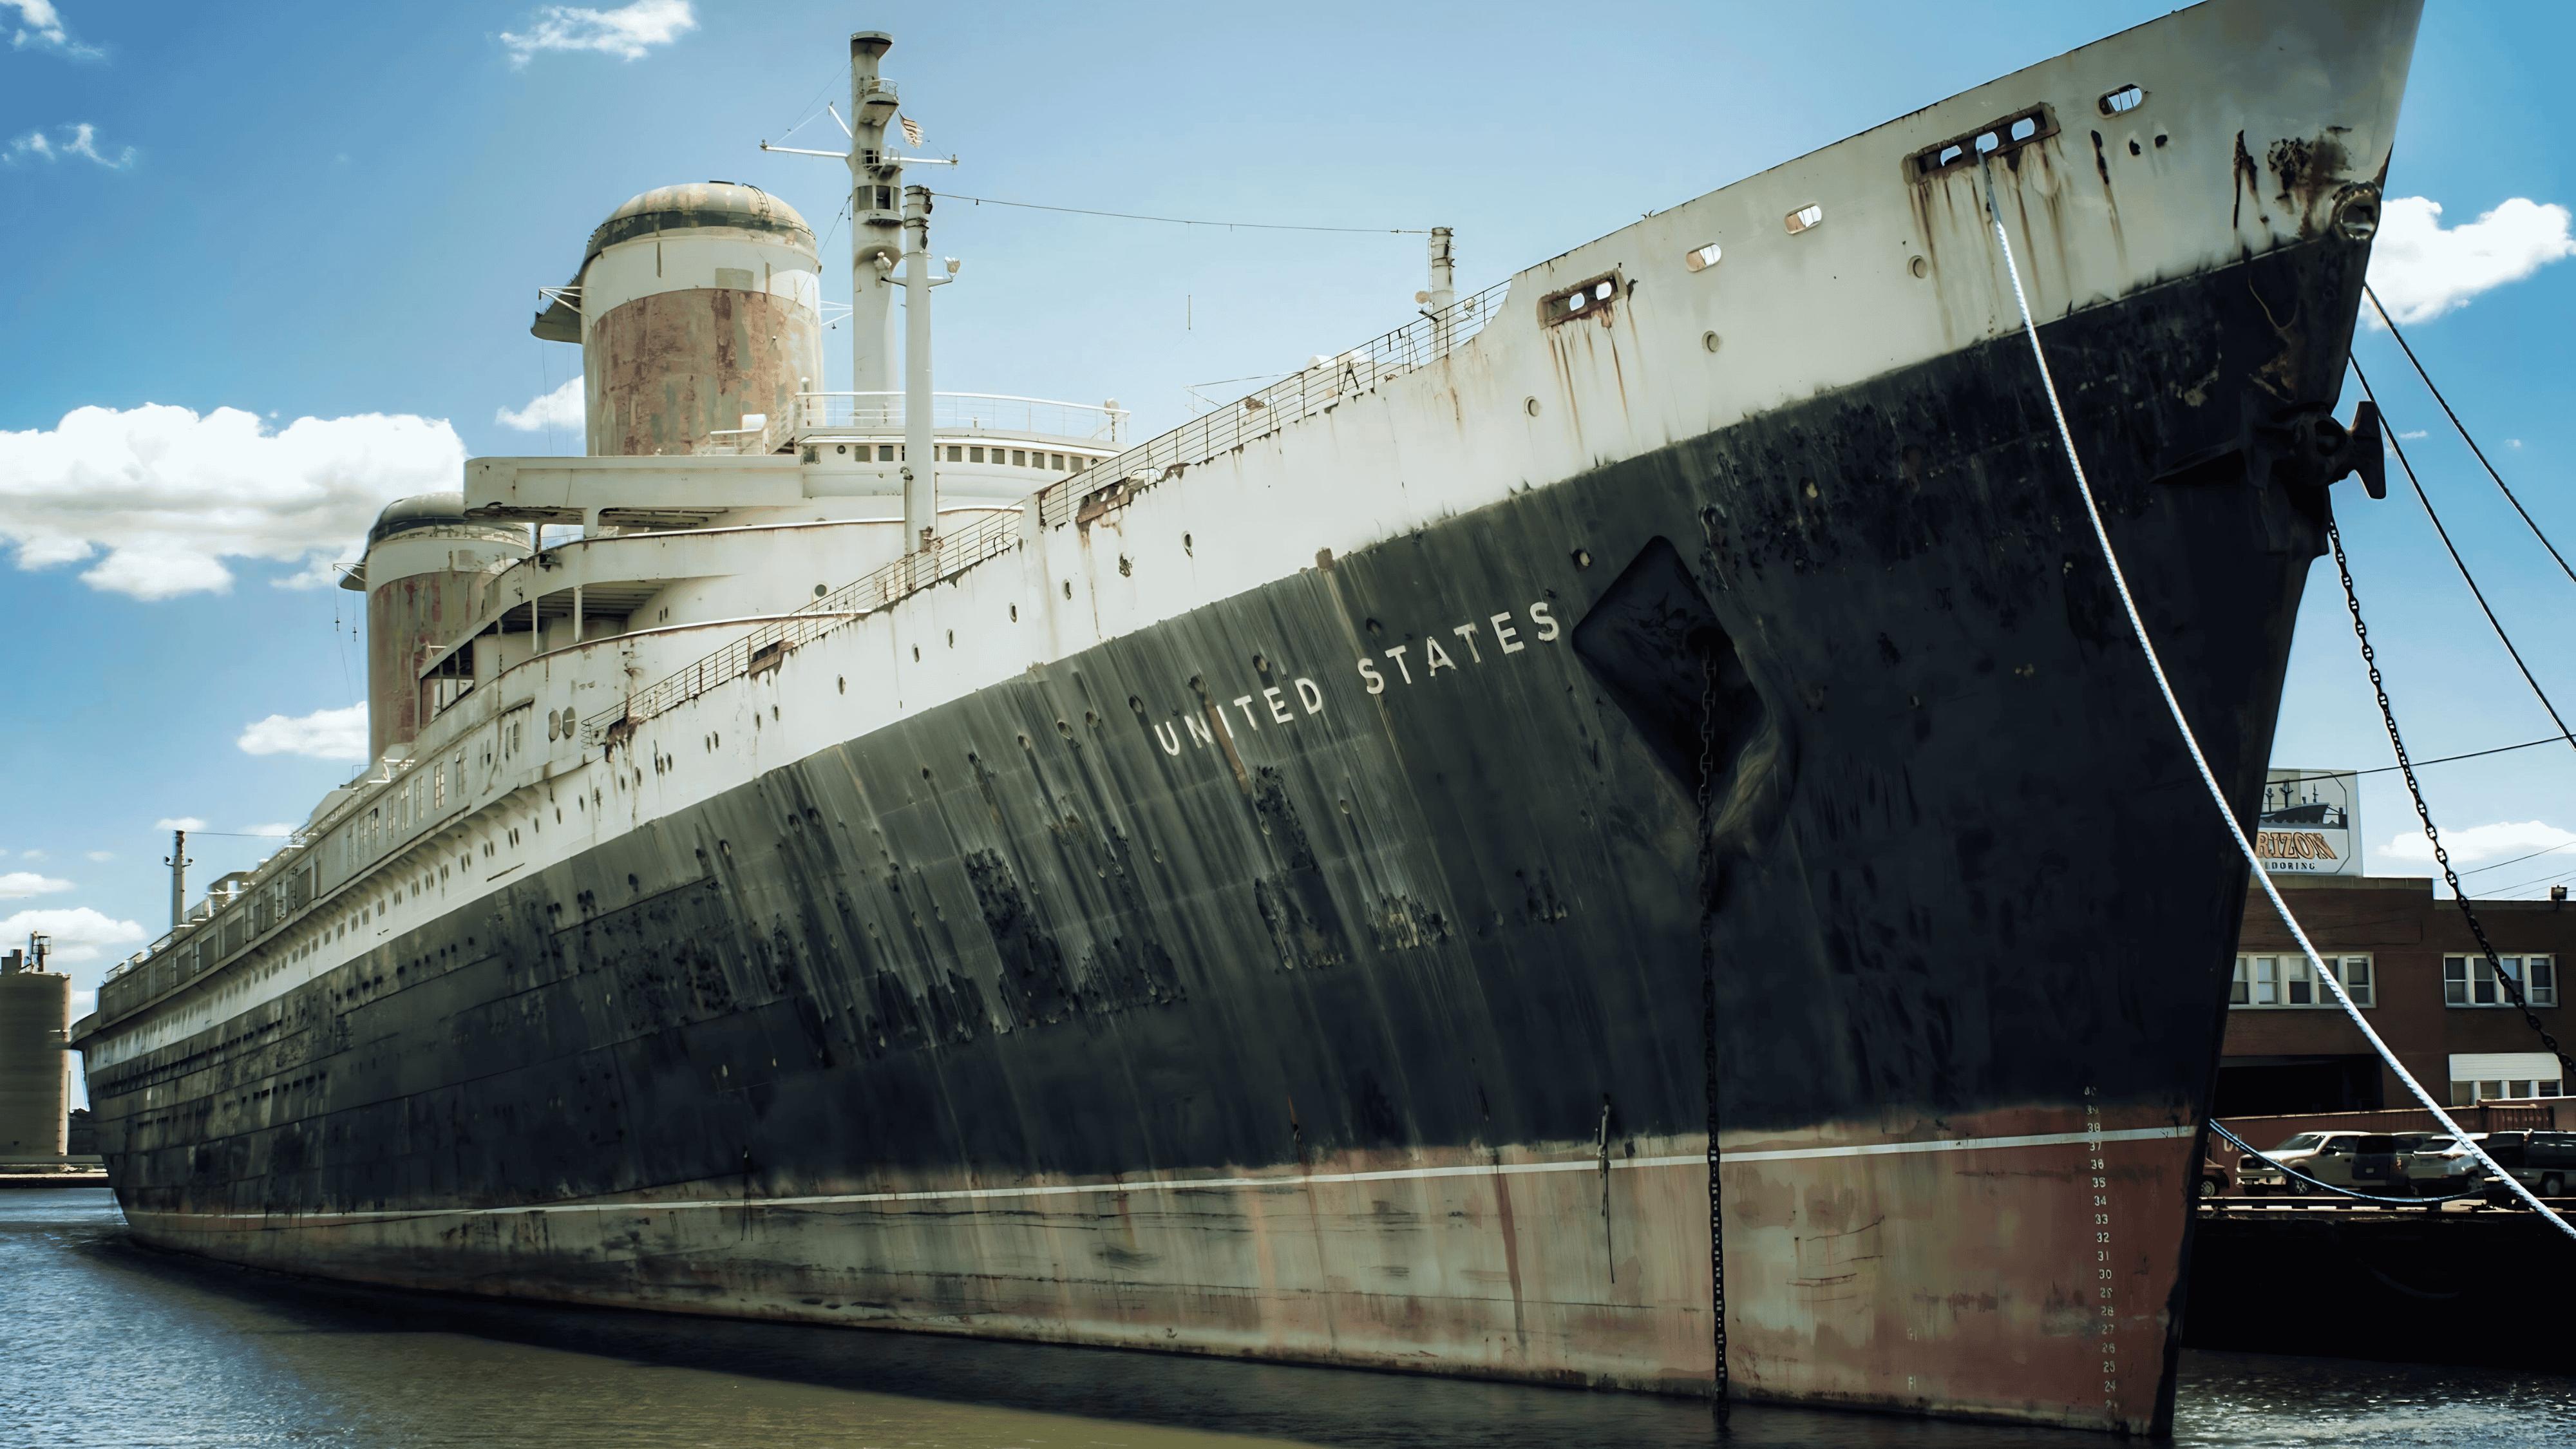 Proposal to Sink SS United States as Artificial Reef Under Review